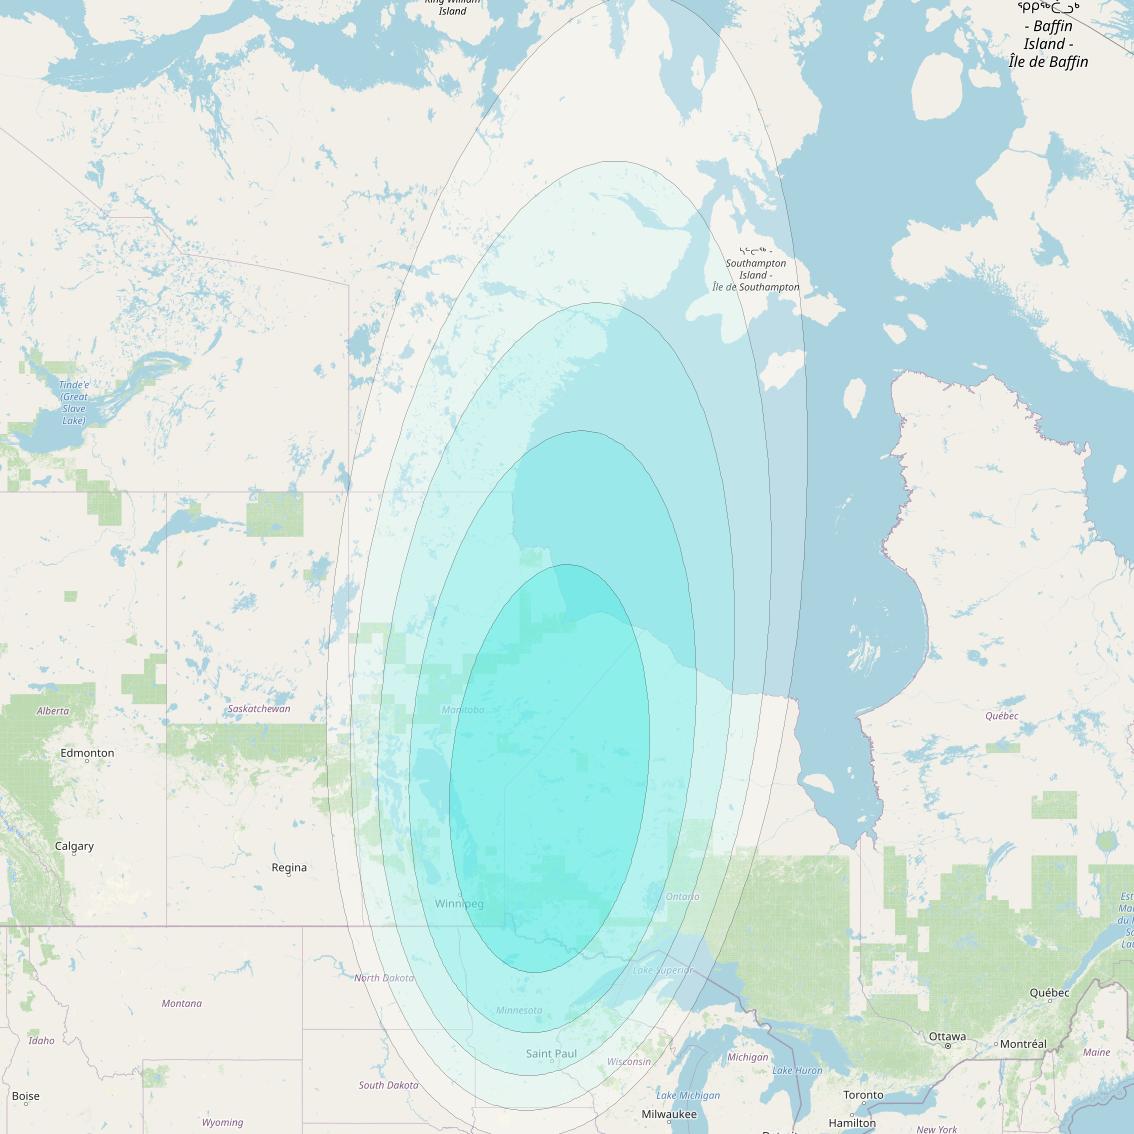 Inmarsat-4F3 at 98° W downlink L-band S110 User Spot beam coverage map